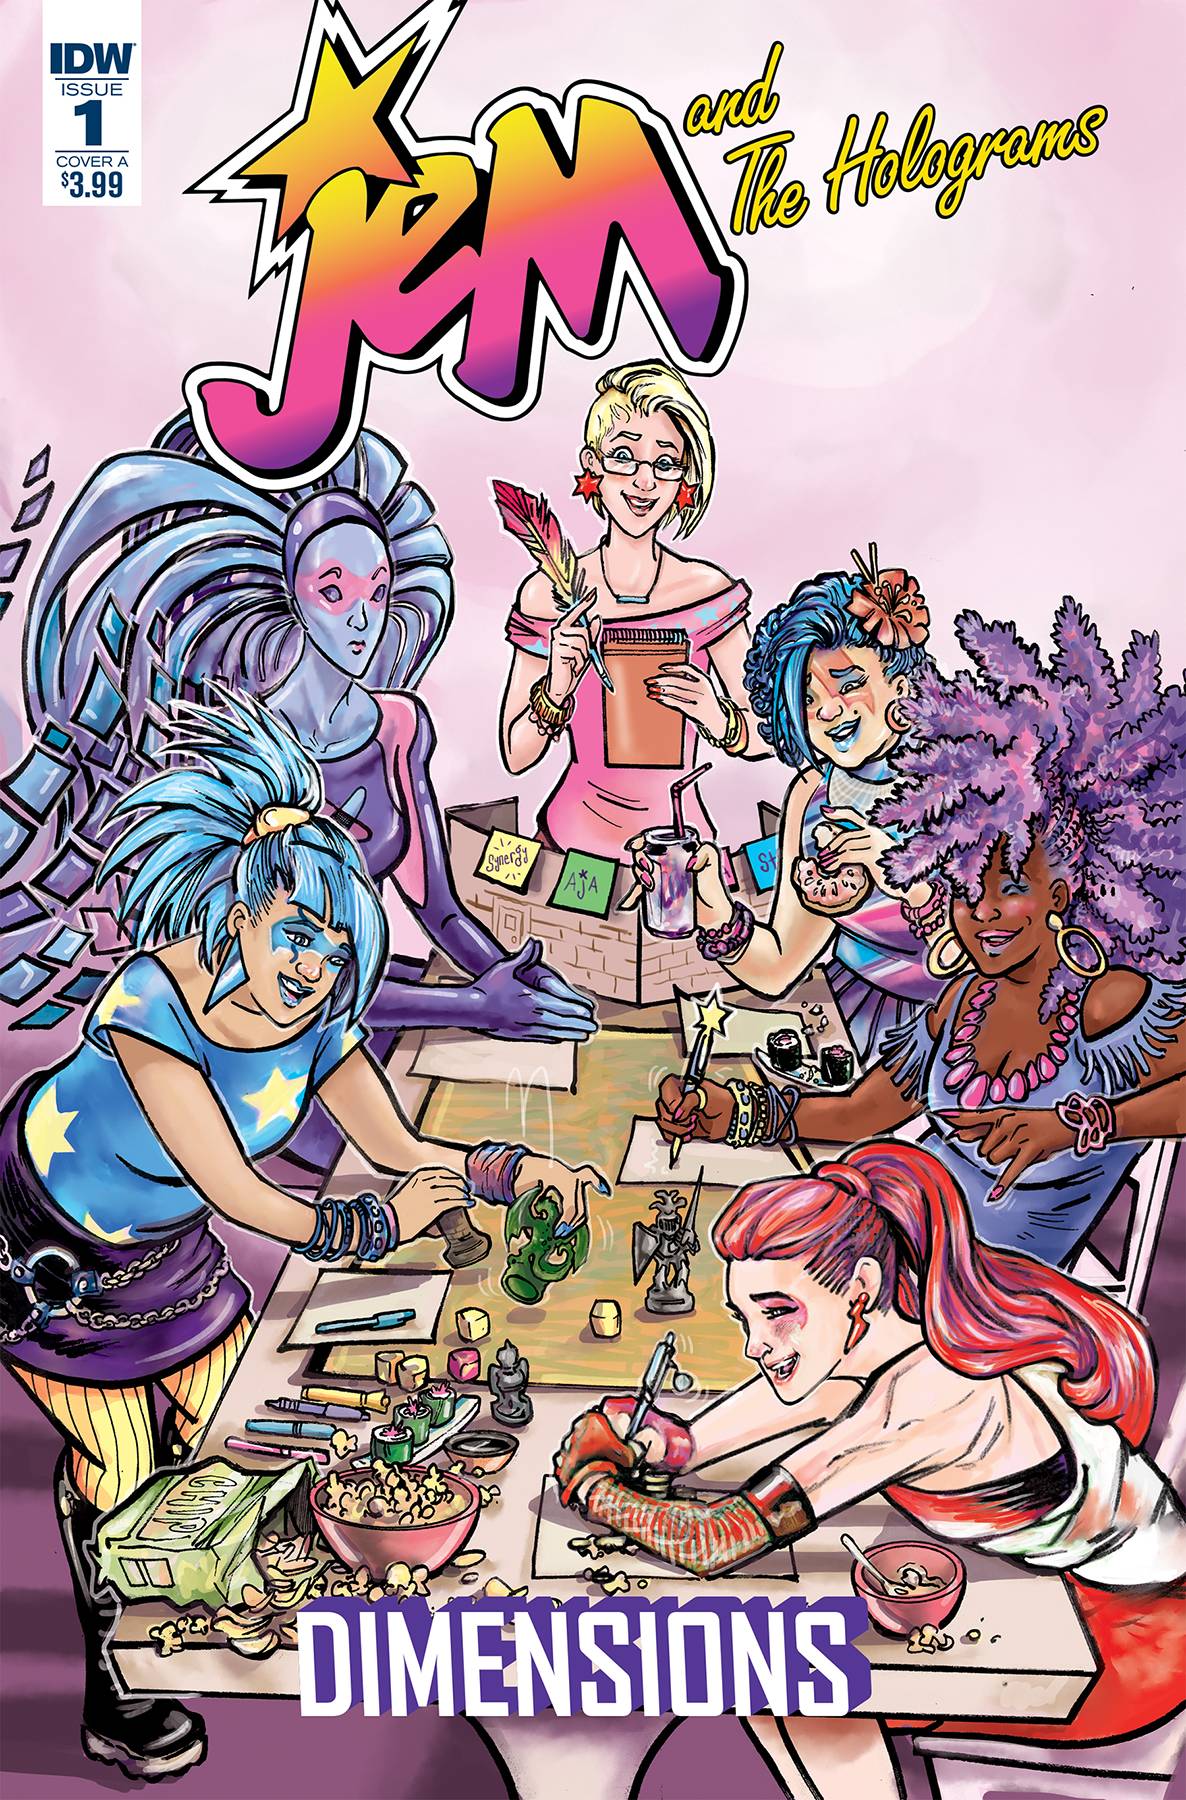 Jem & The Holograms Dimensions #1 Cover A Ford